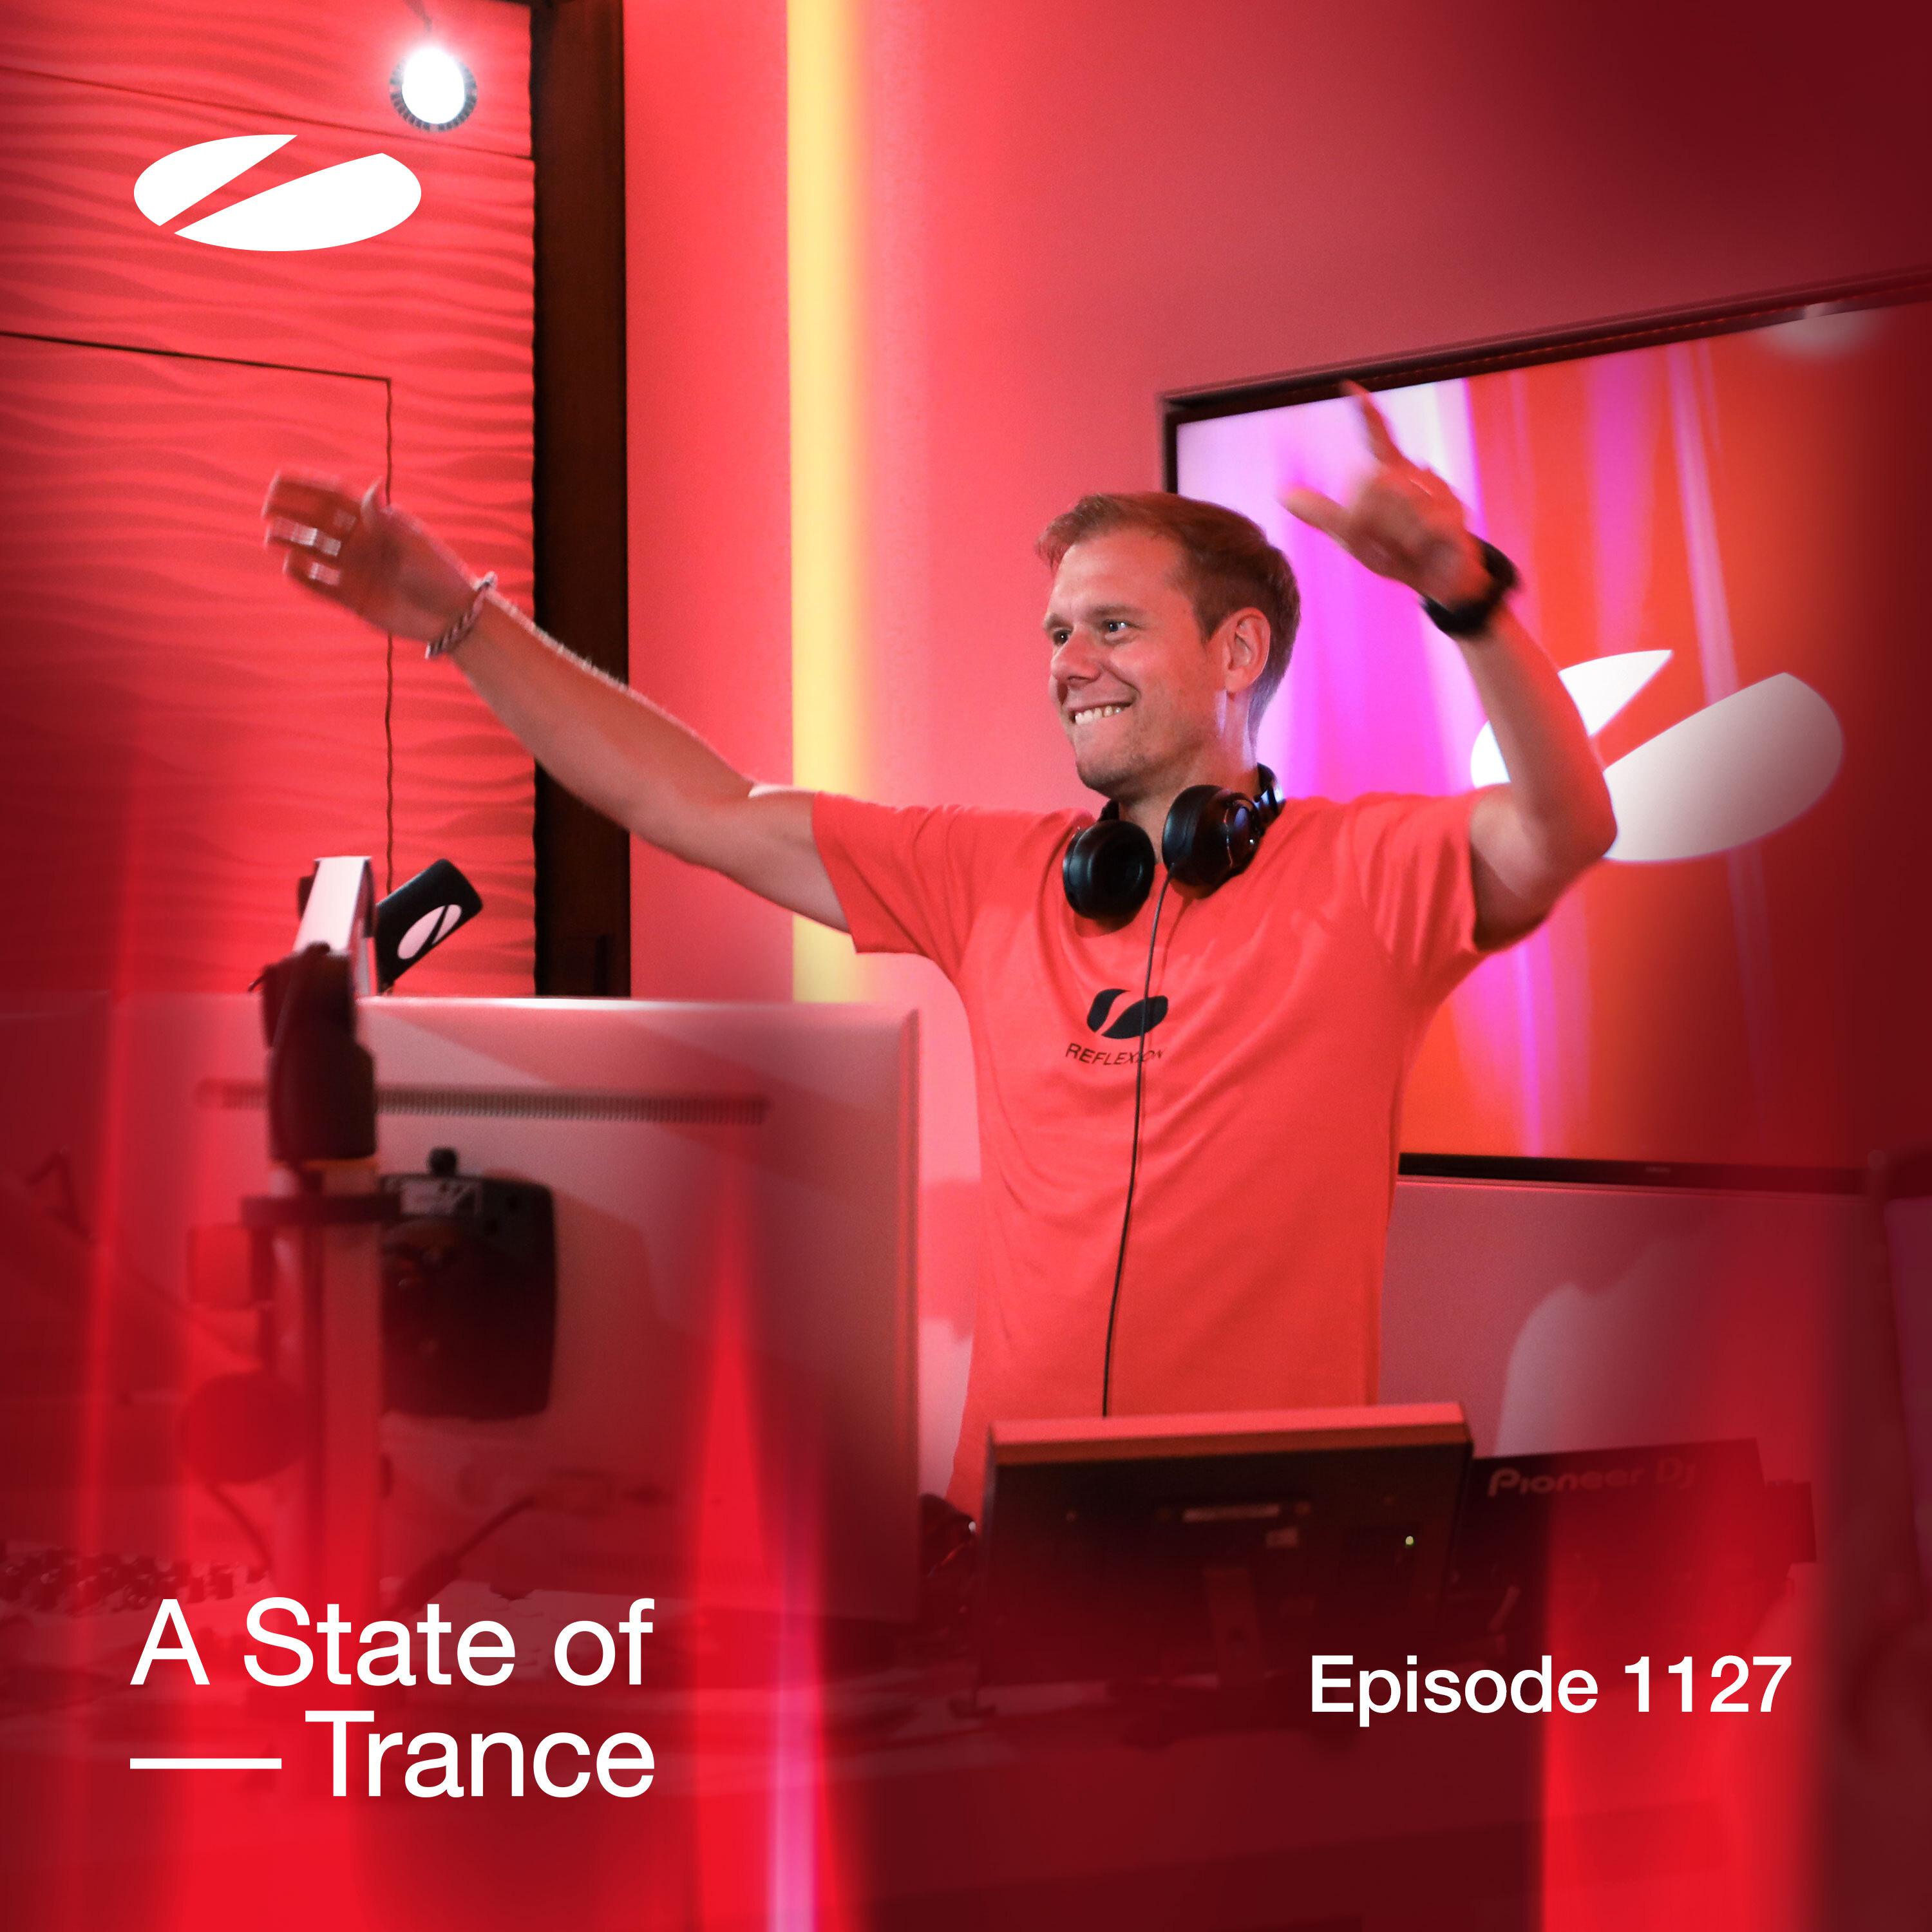 LÜRUM - The Way It Goes (ASOT 1127)